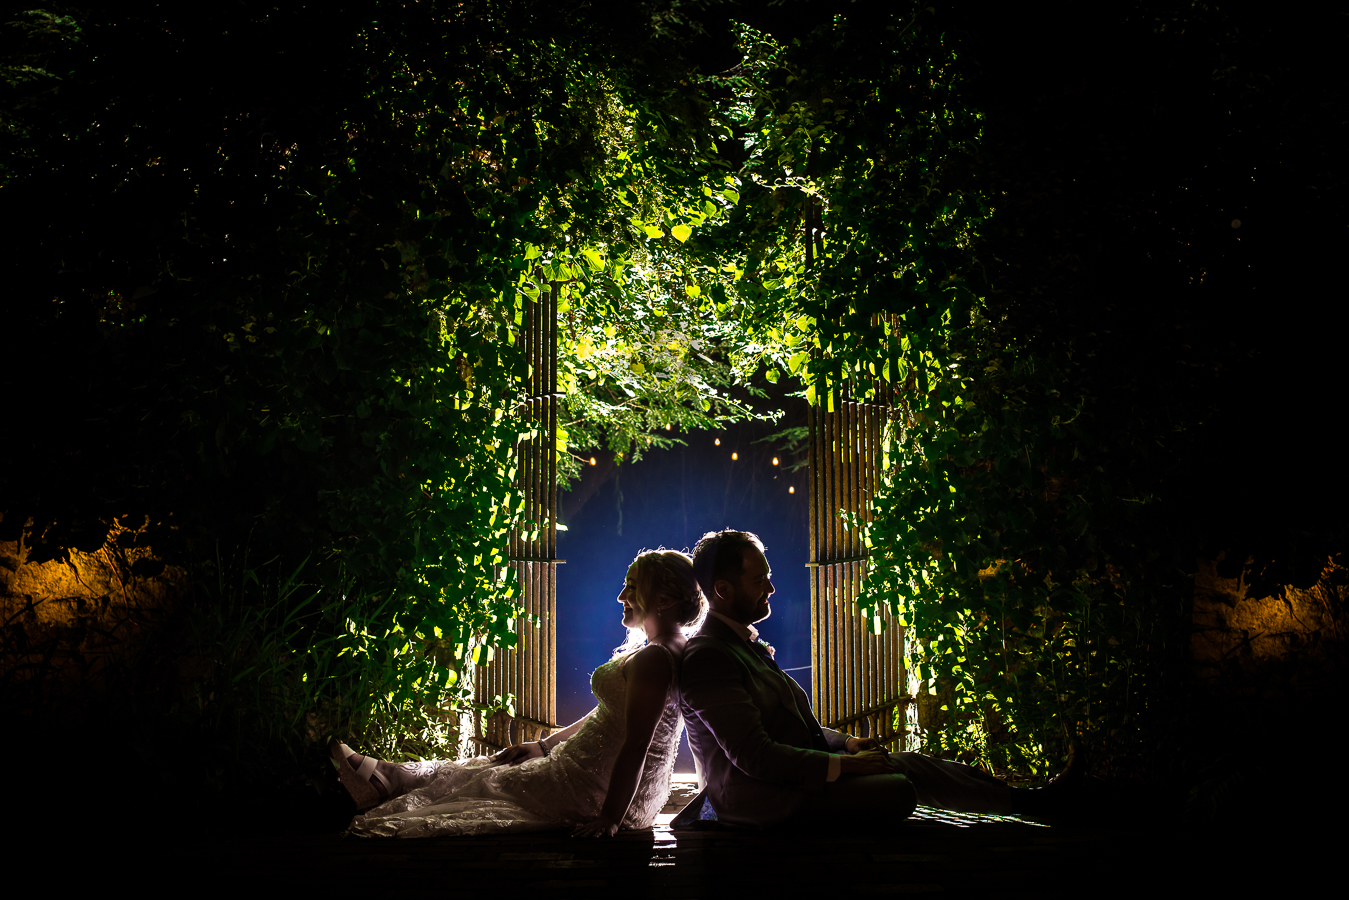 Holly Hedge Estate Wedding Photographer, lisa rhinehart, captures this unique, creative backlit image of the bride and groom sitting back to back surrounded by greenery in the archway 